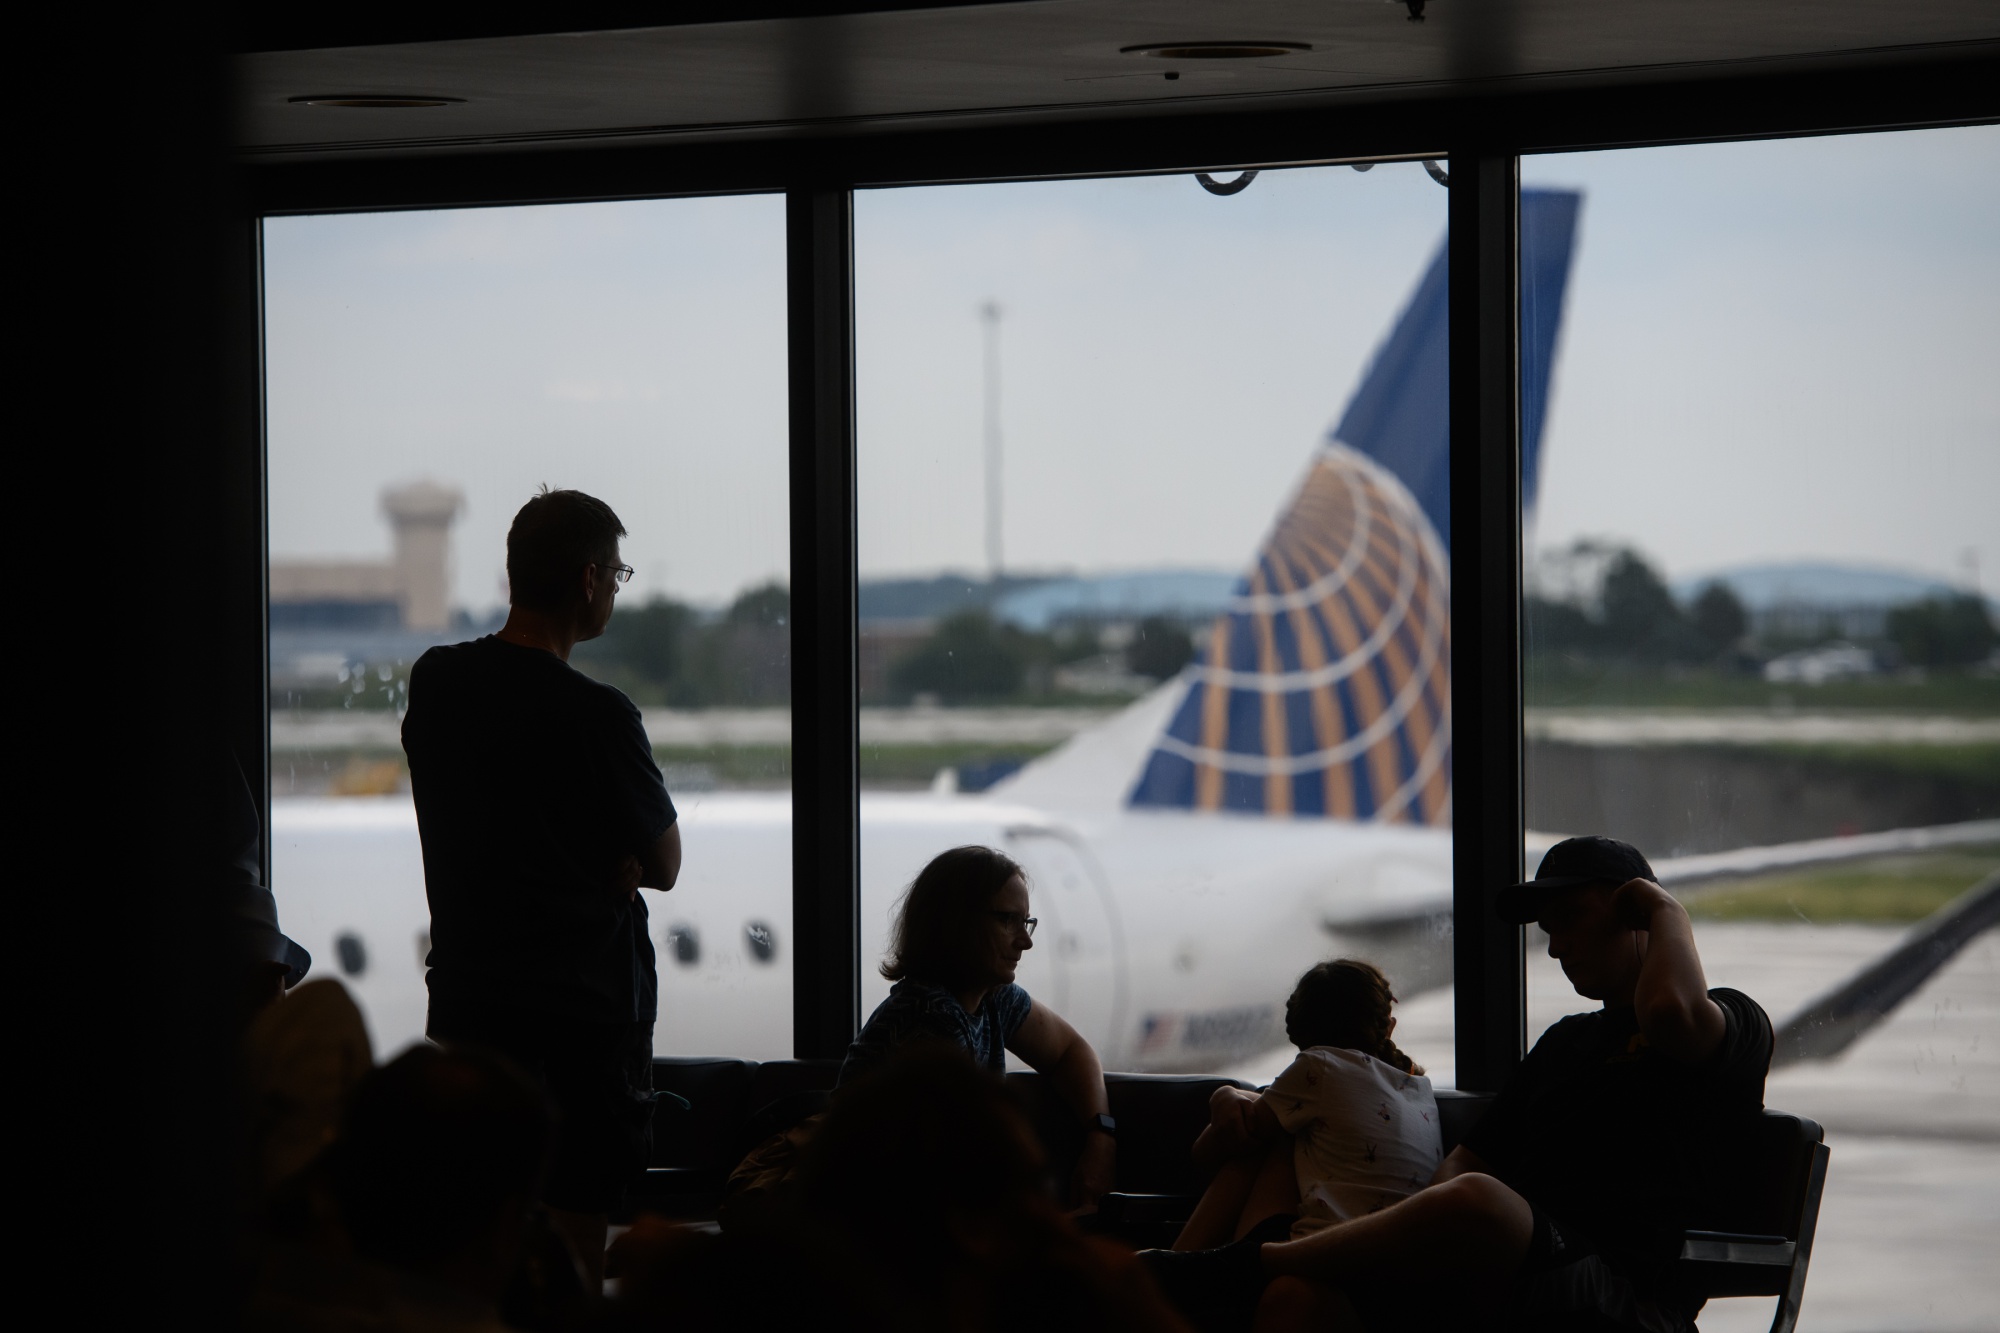 United Air to Expand Discounted ‘Basic’ Fares to Win Travelers - Bloomberg